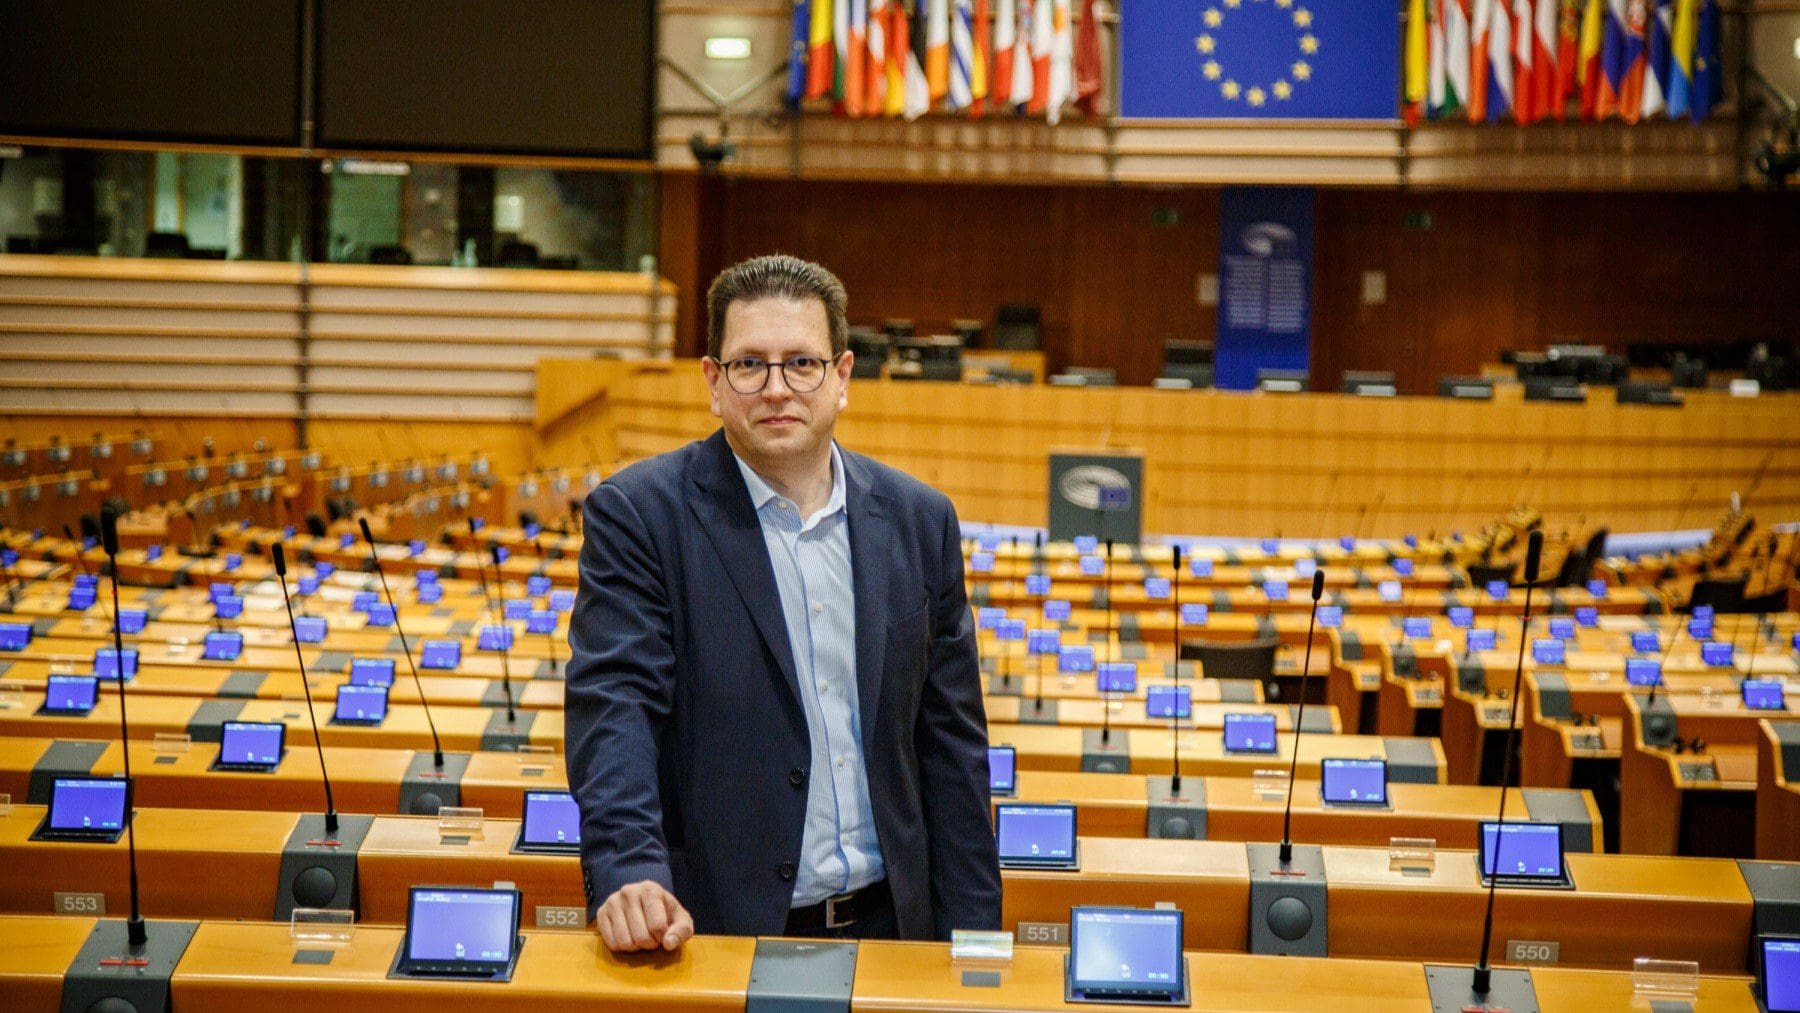 Loránt Vincze, MEP in the building of the European Parliament in Brussels, on December 8th 2021.